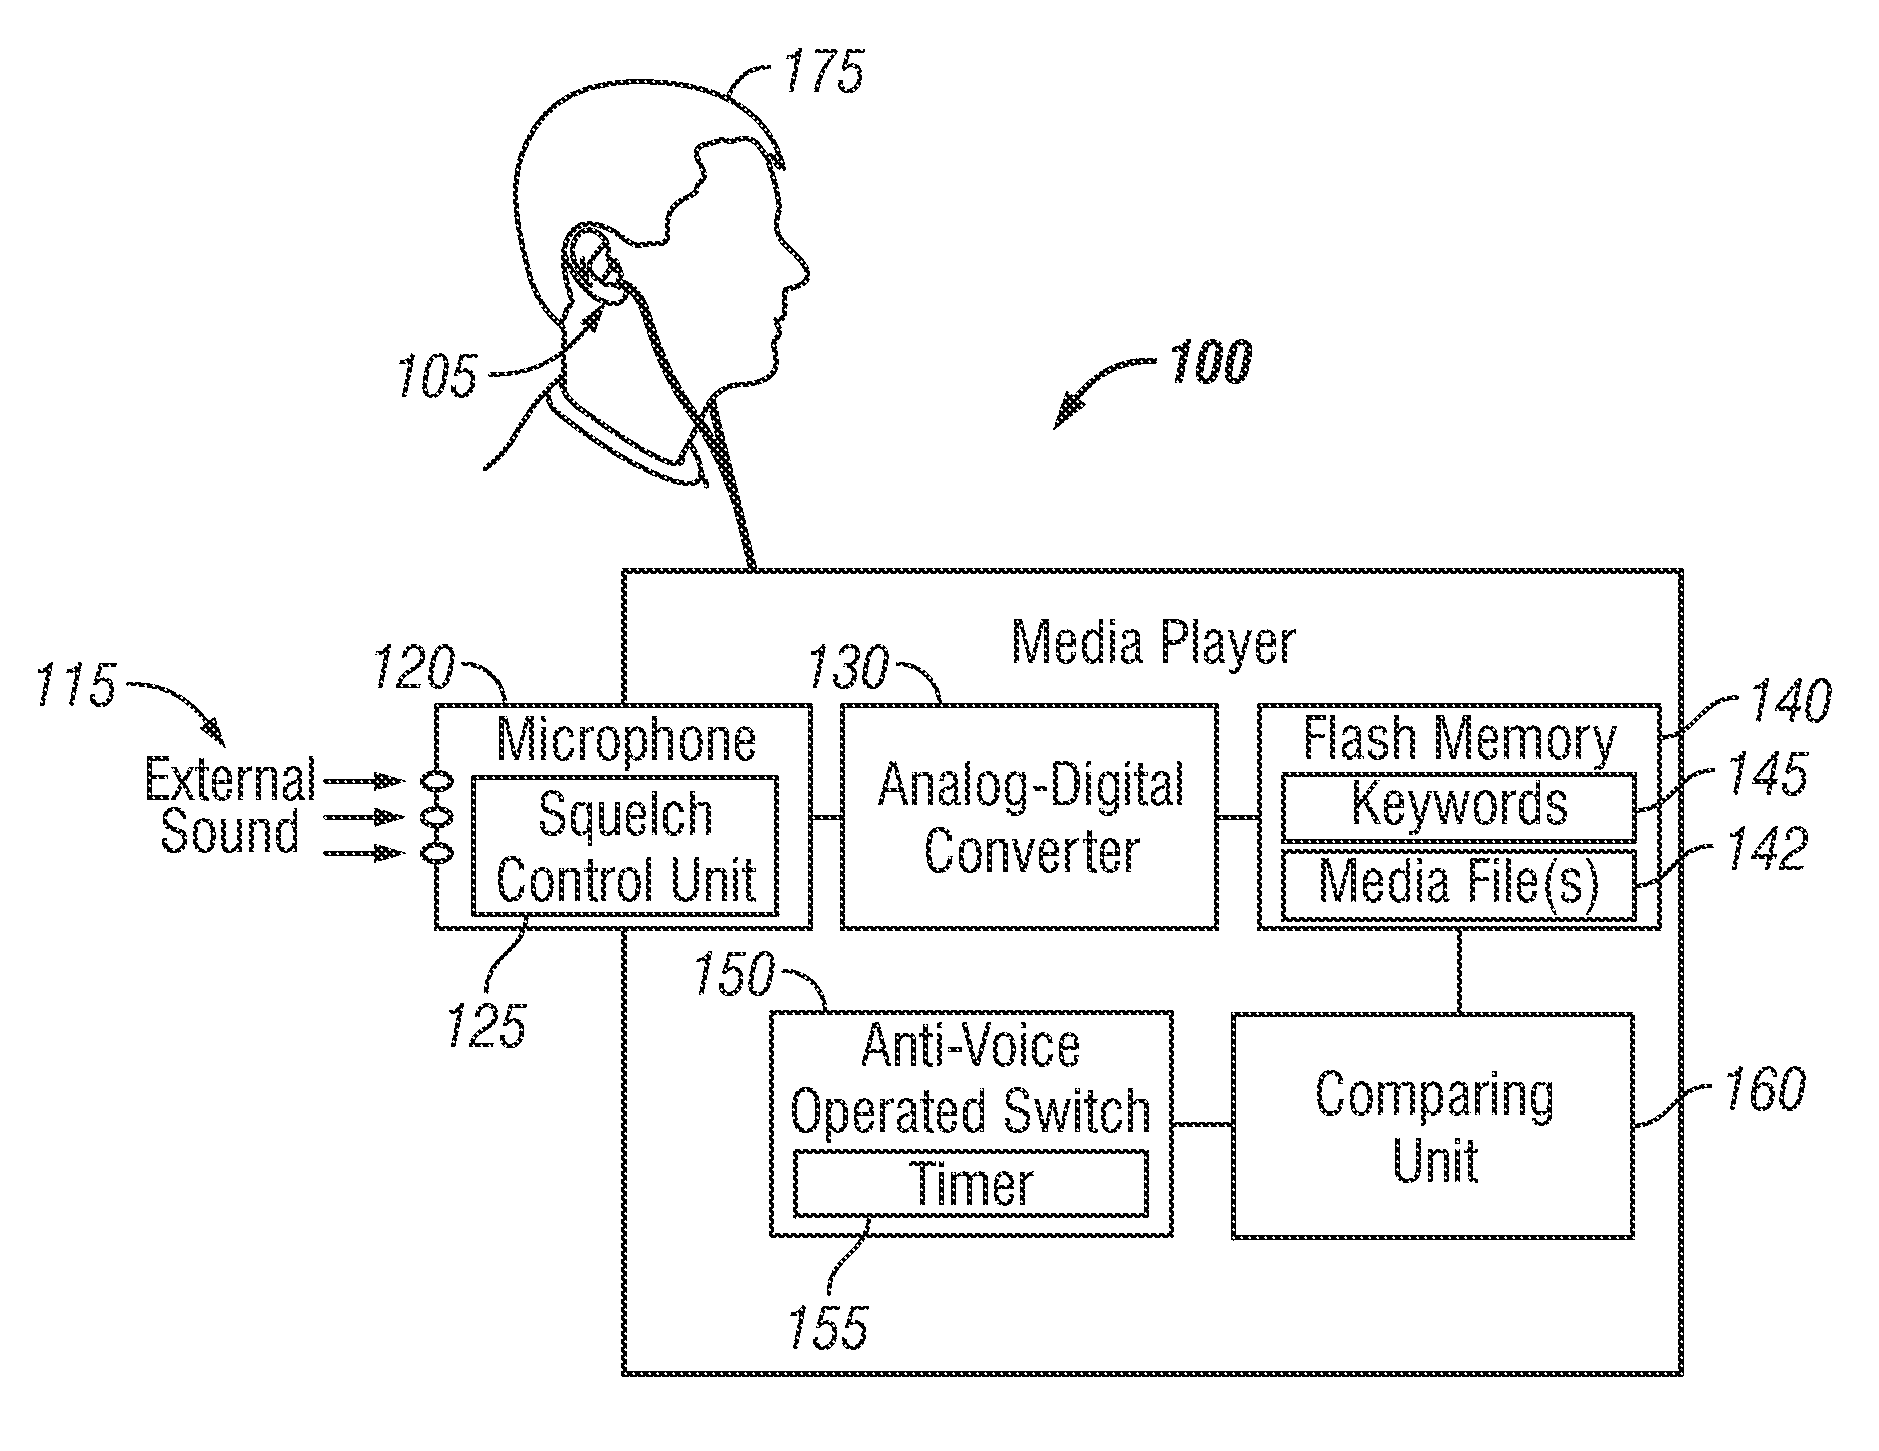 Media player system with Anti-voice operated switch